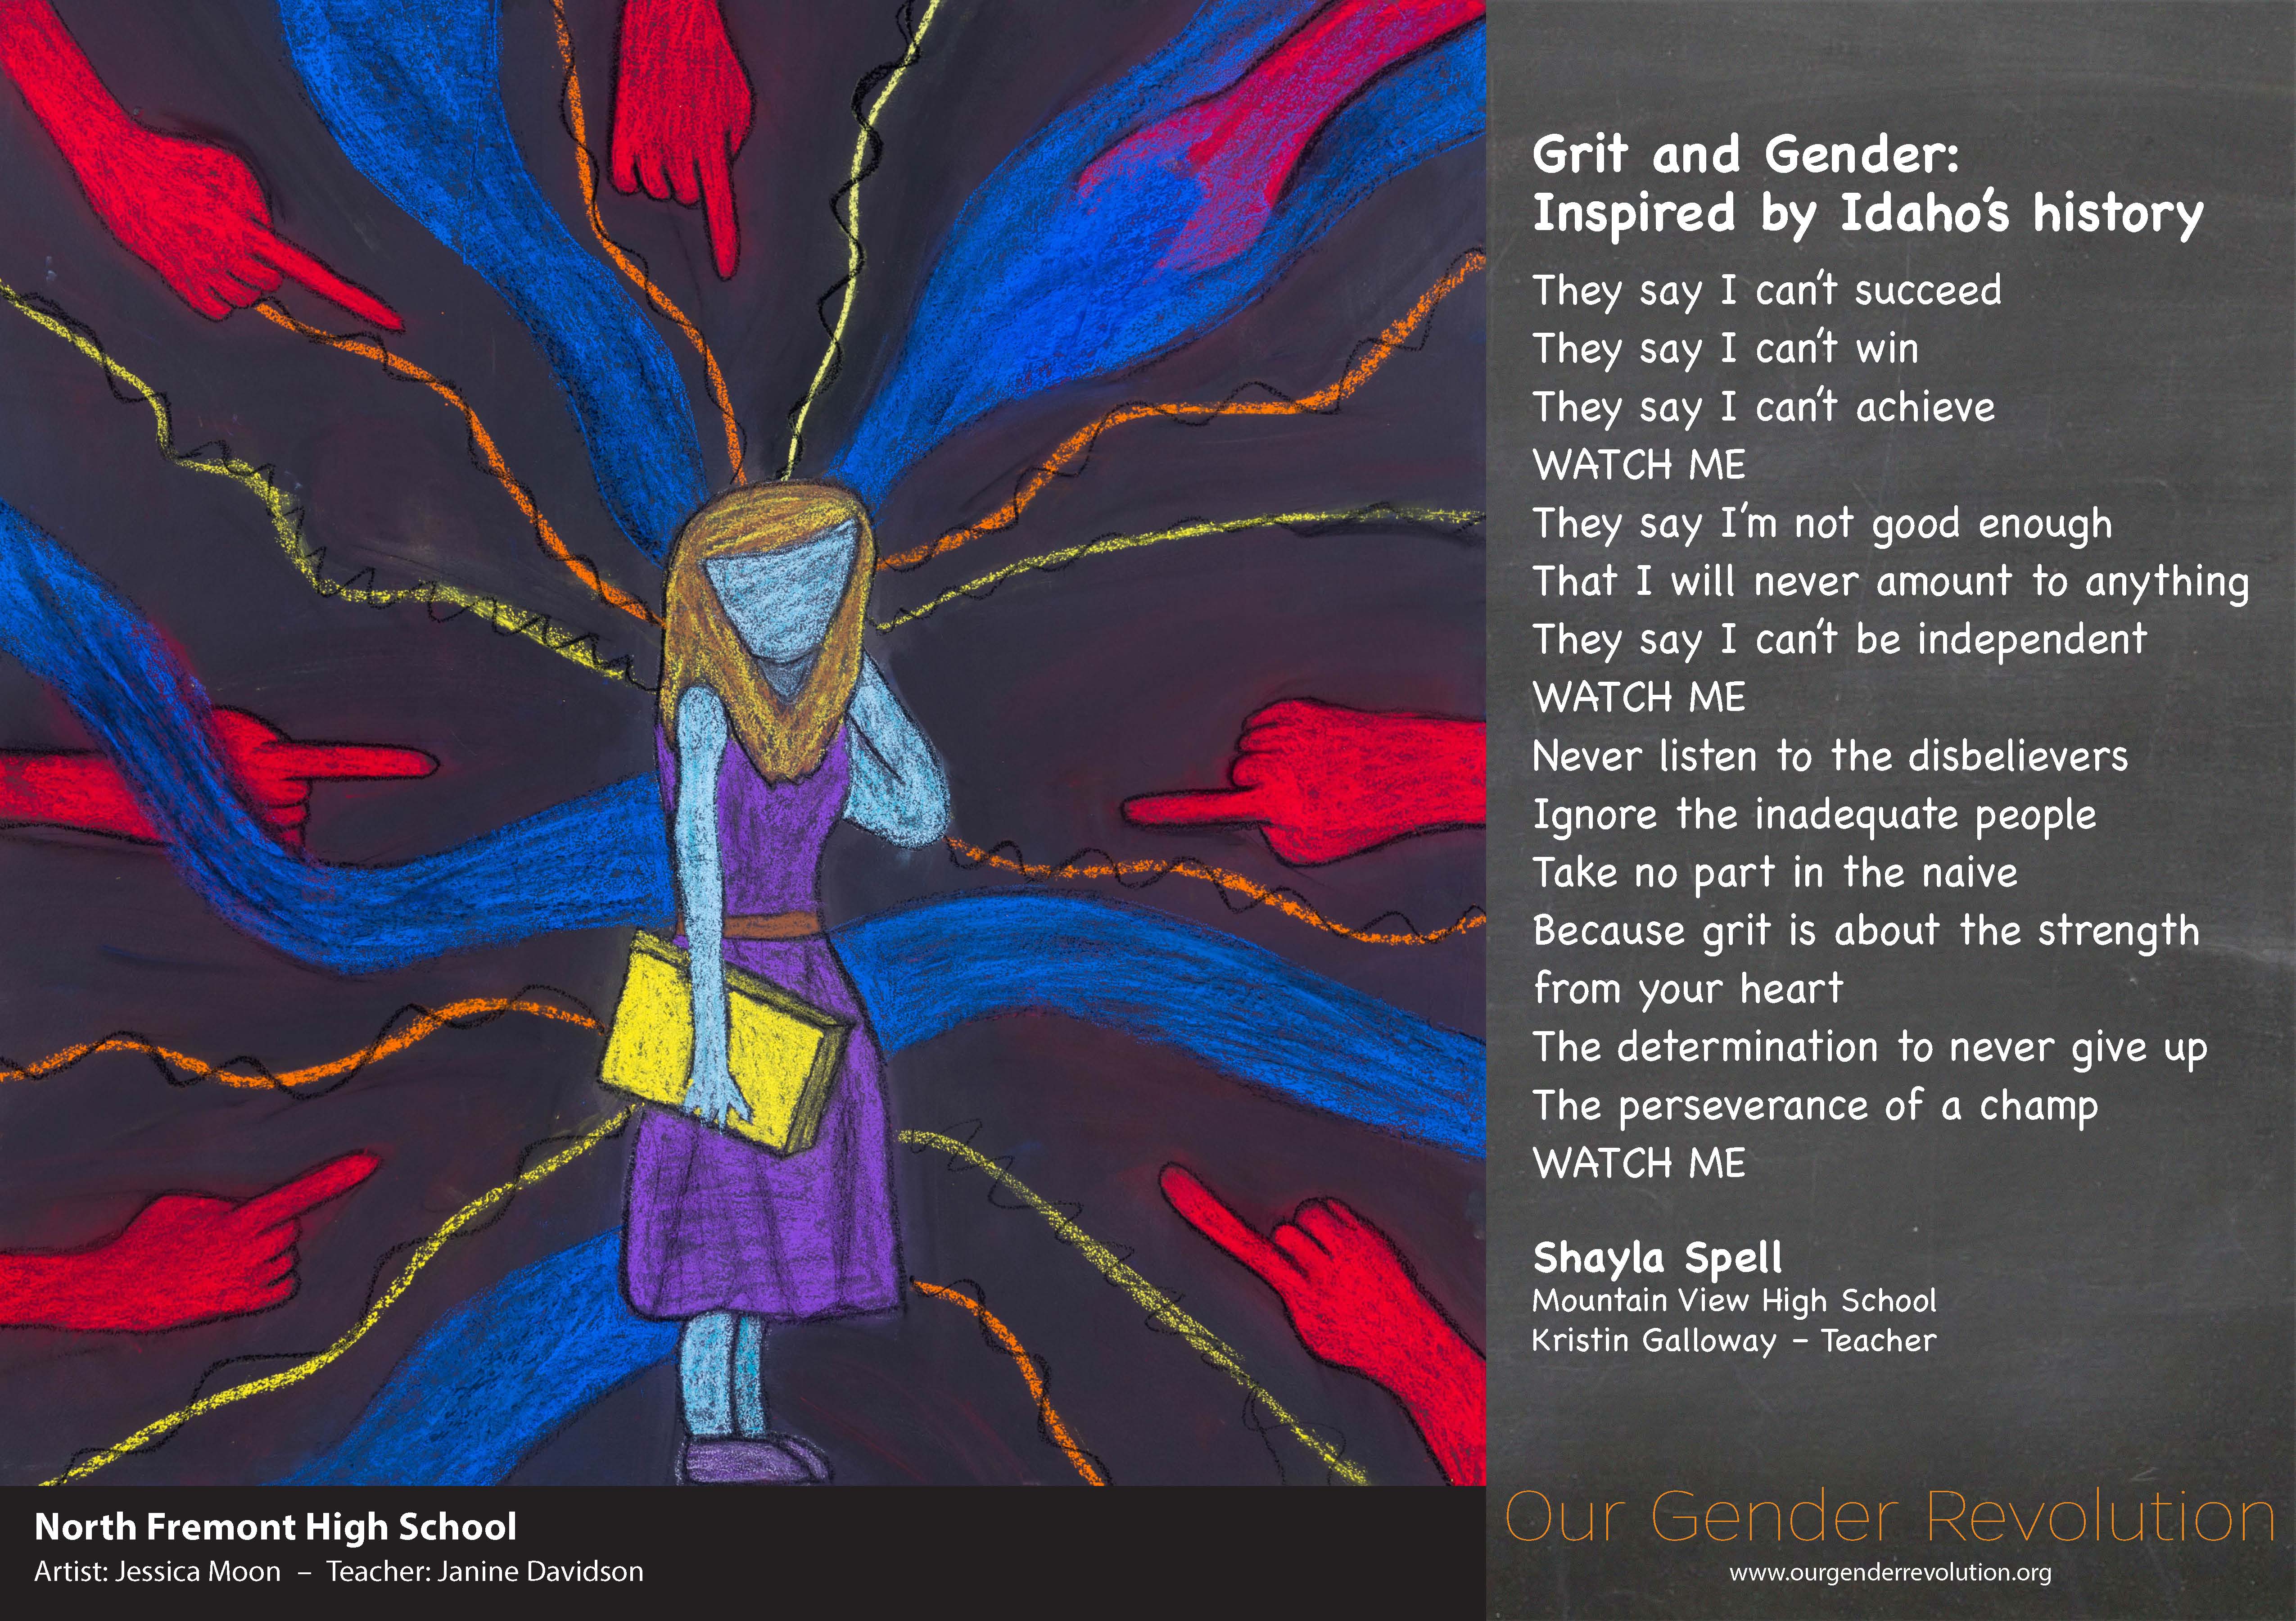 North Fremont High School - Grit and Gender by Shayla Spell